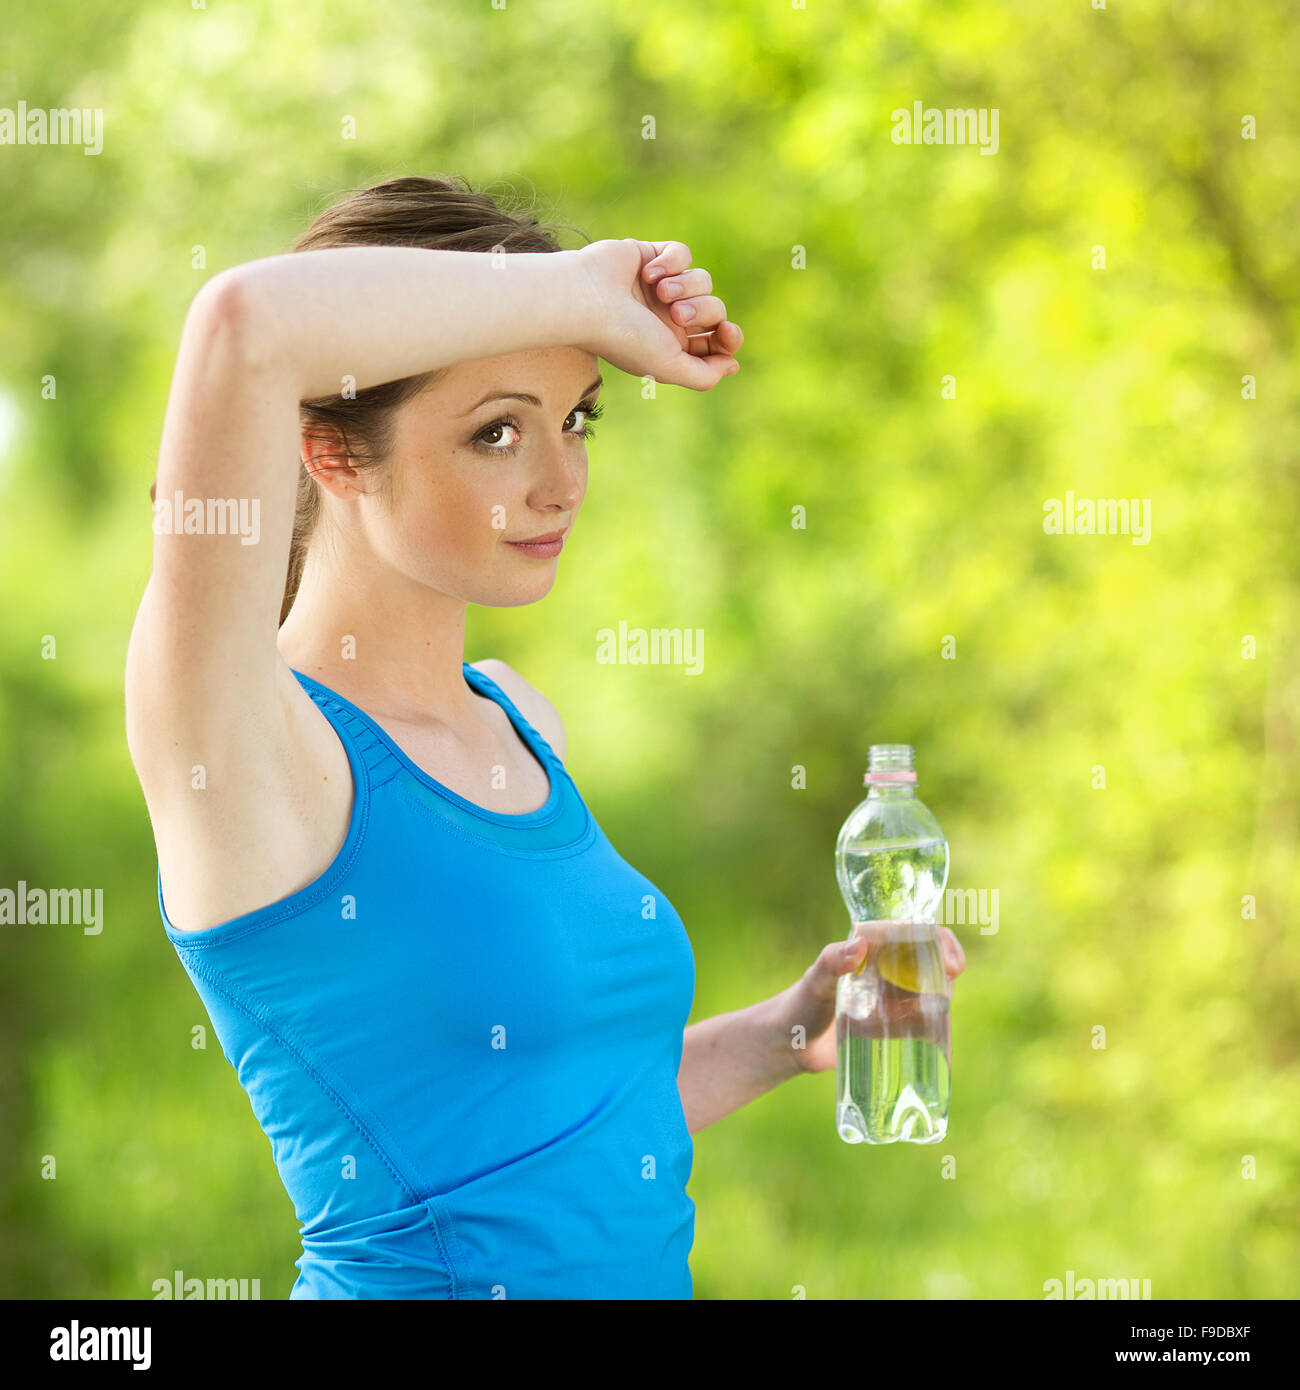 Athlete refreshing with a bottle of water during the outdoor exercise Stock Photo